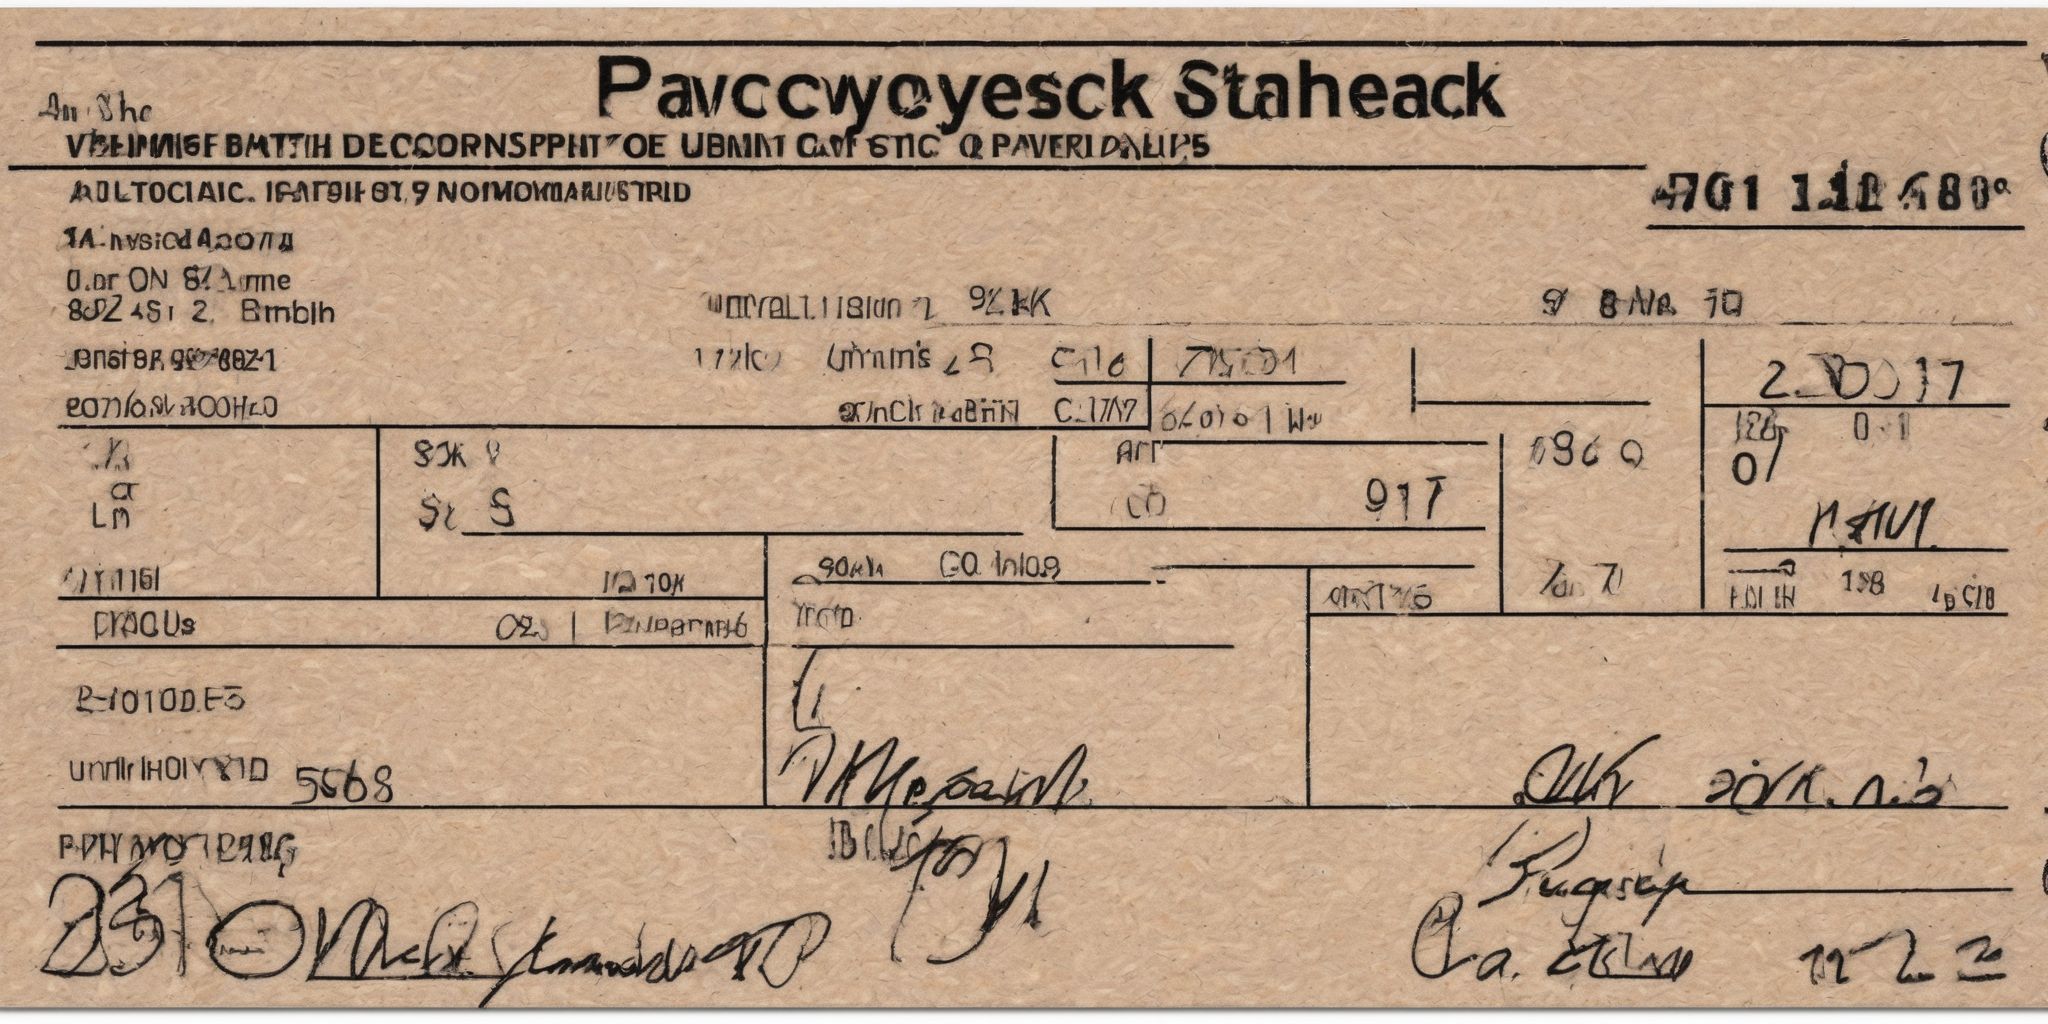 Paycheck stub  in realistic, photographic style